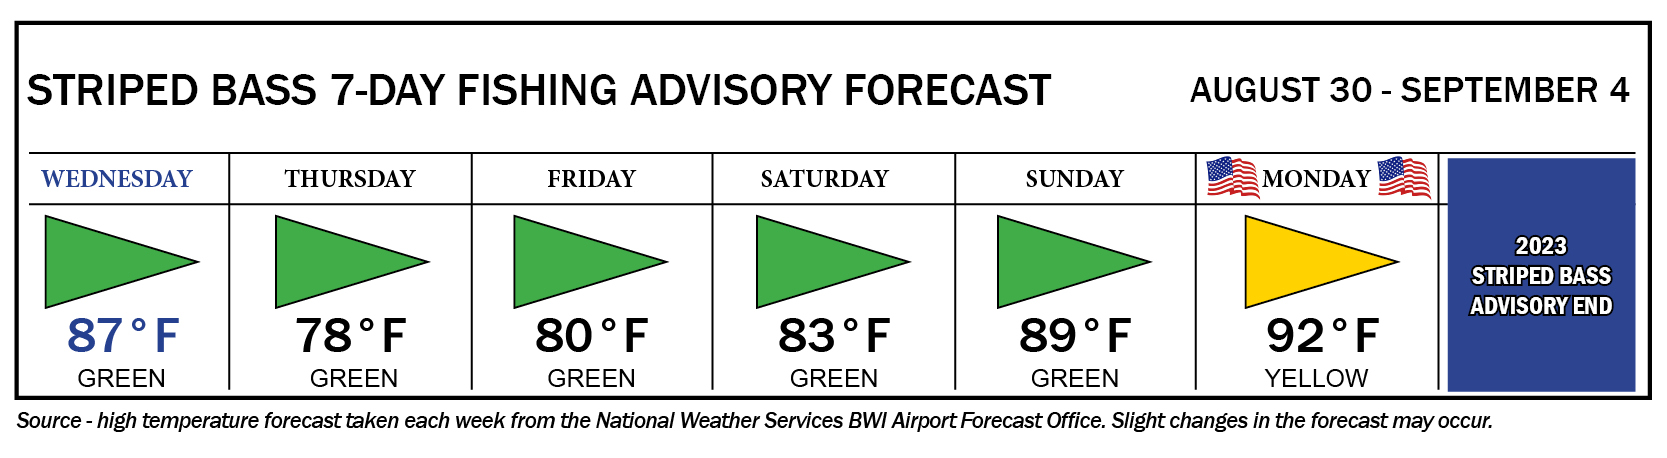 Image of weekly forecast with all green flags for the week of August 2-8